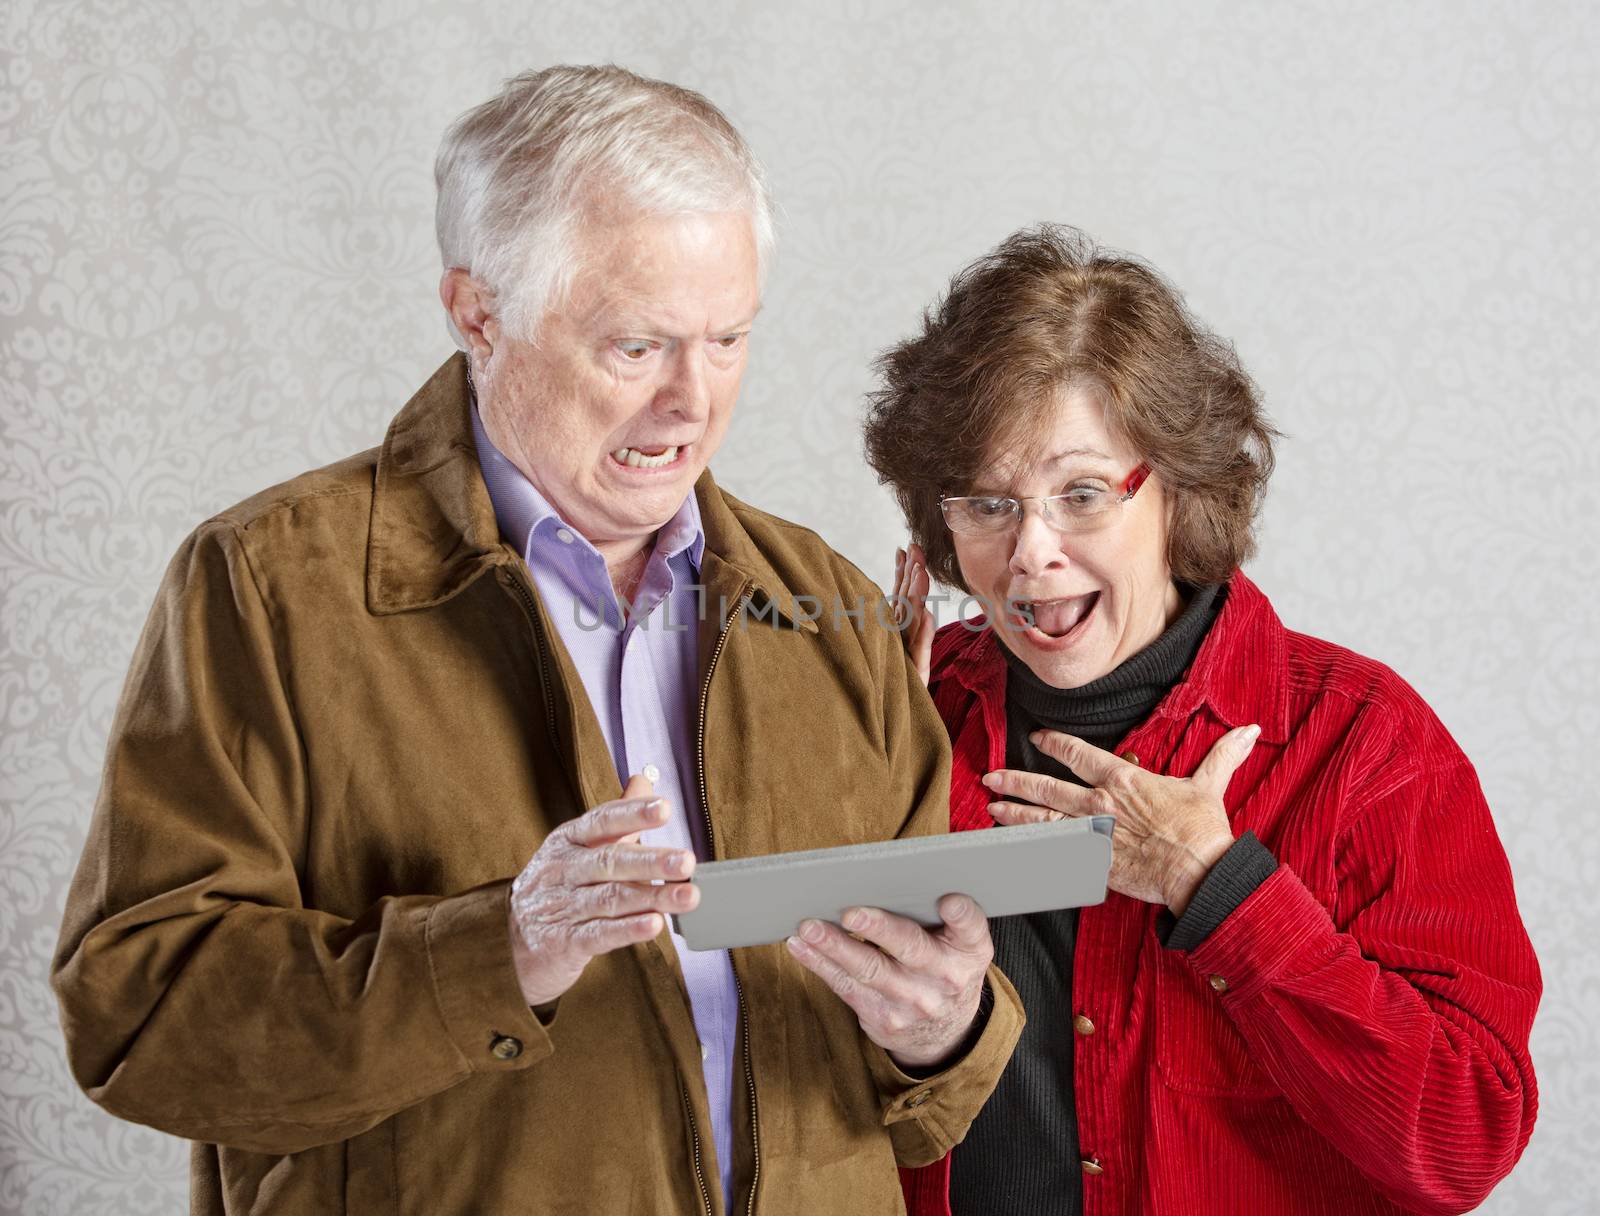 Shocked Couple with Tablet by Creatista